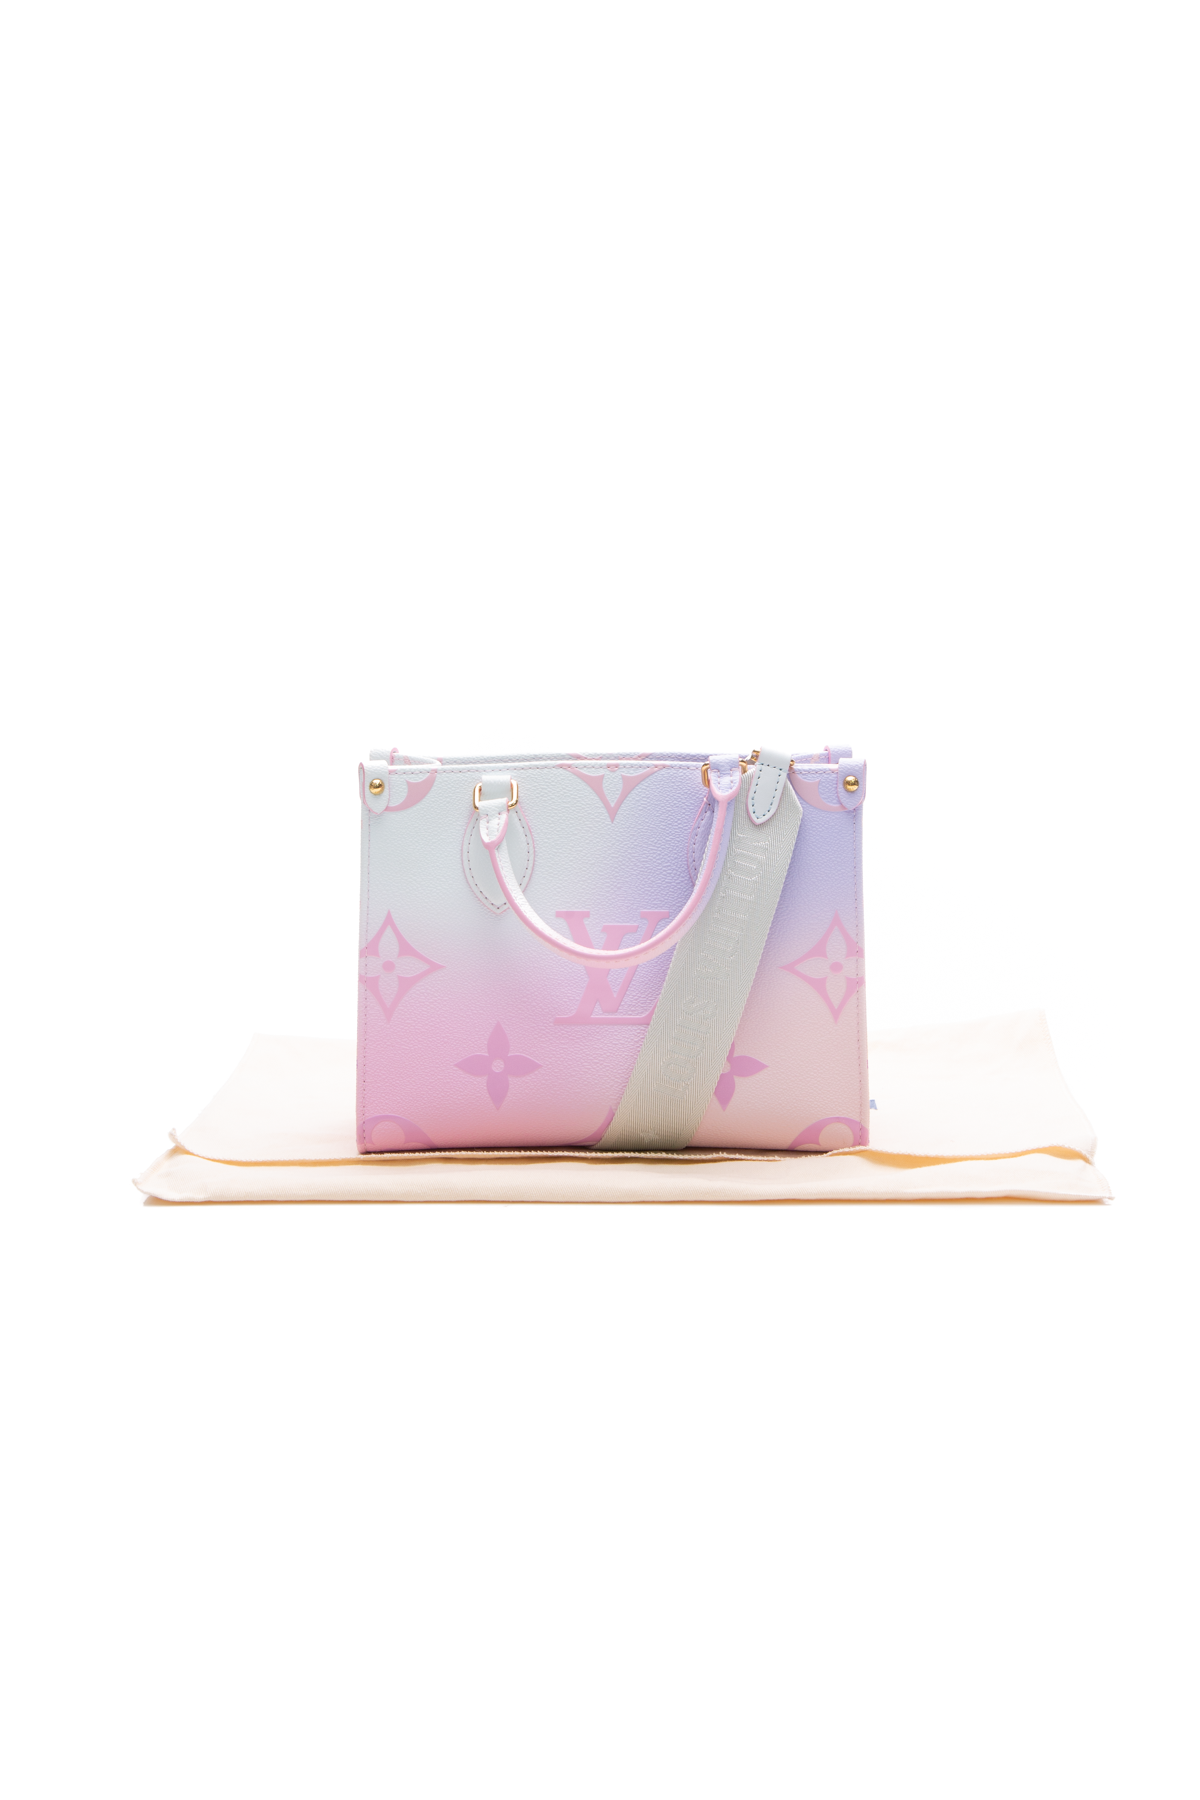 LOUIS VUITTON SPRING IN THE CITY-SUNRISE PASTEL UNBOXING!!! The